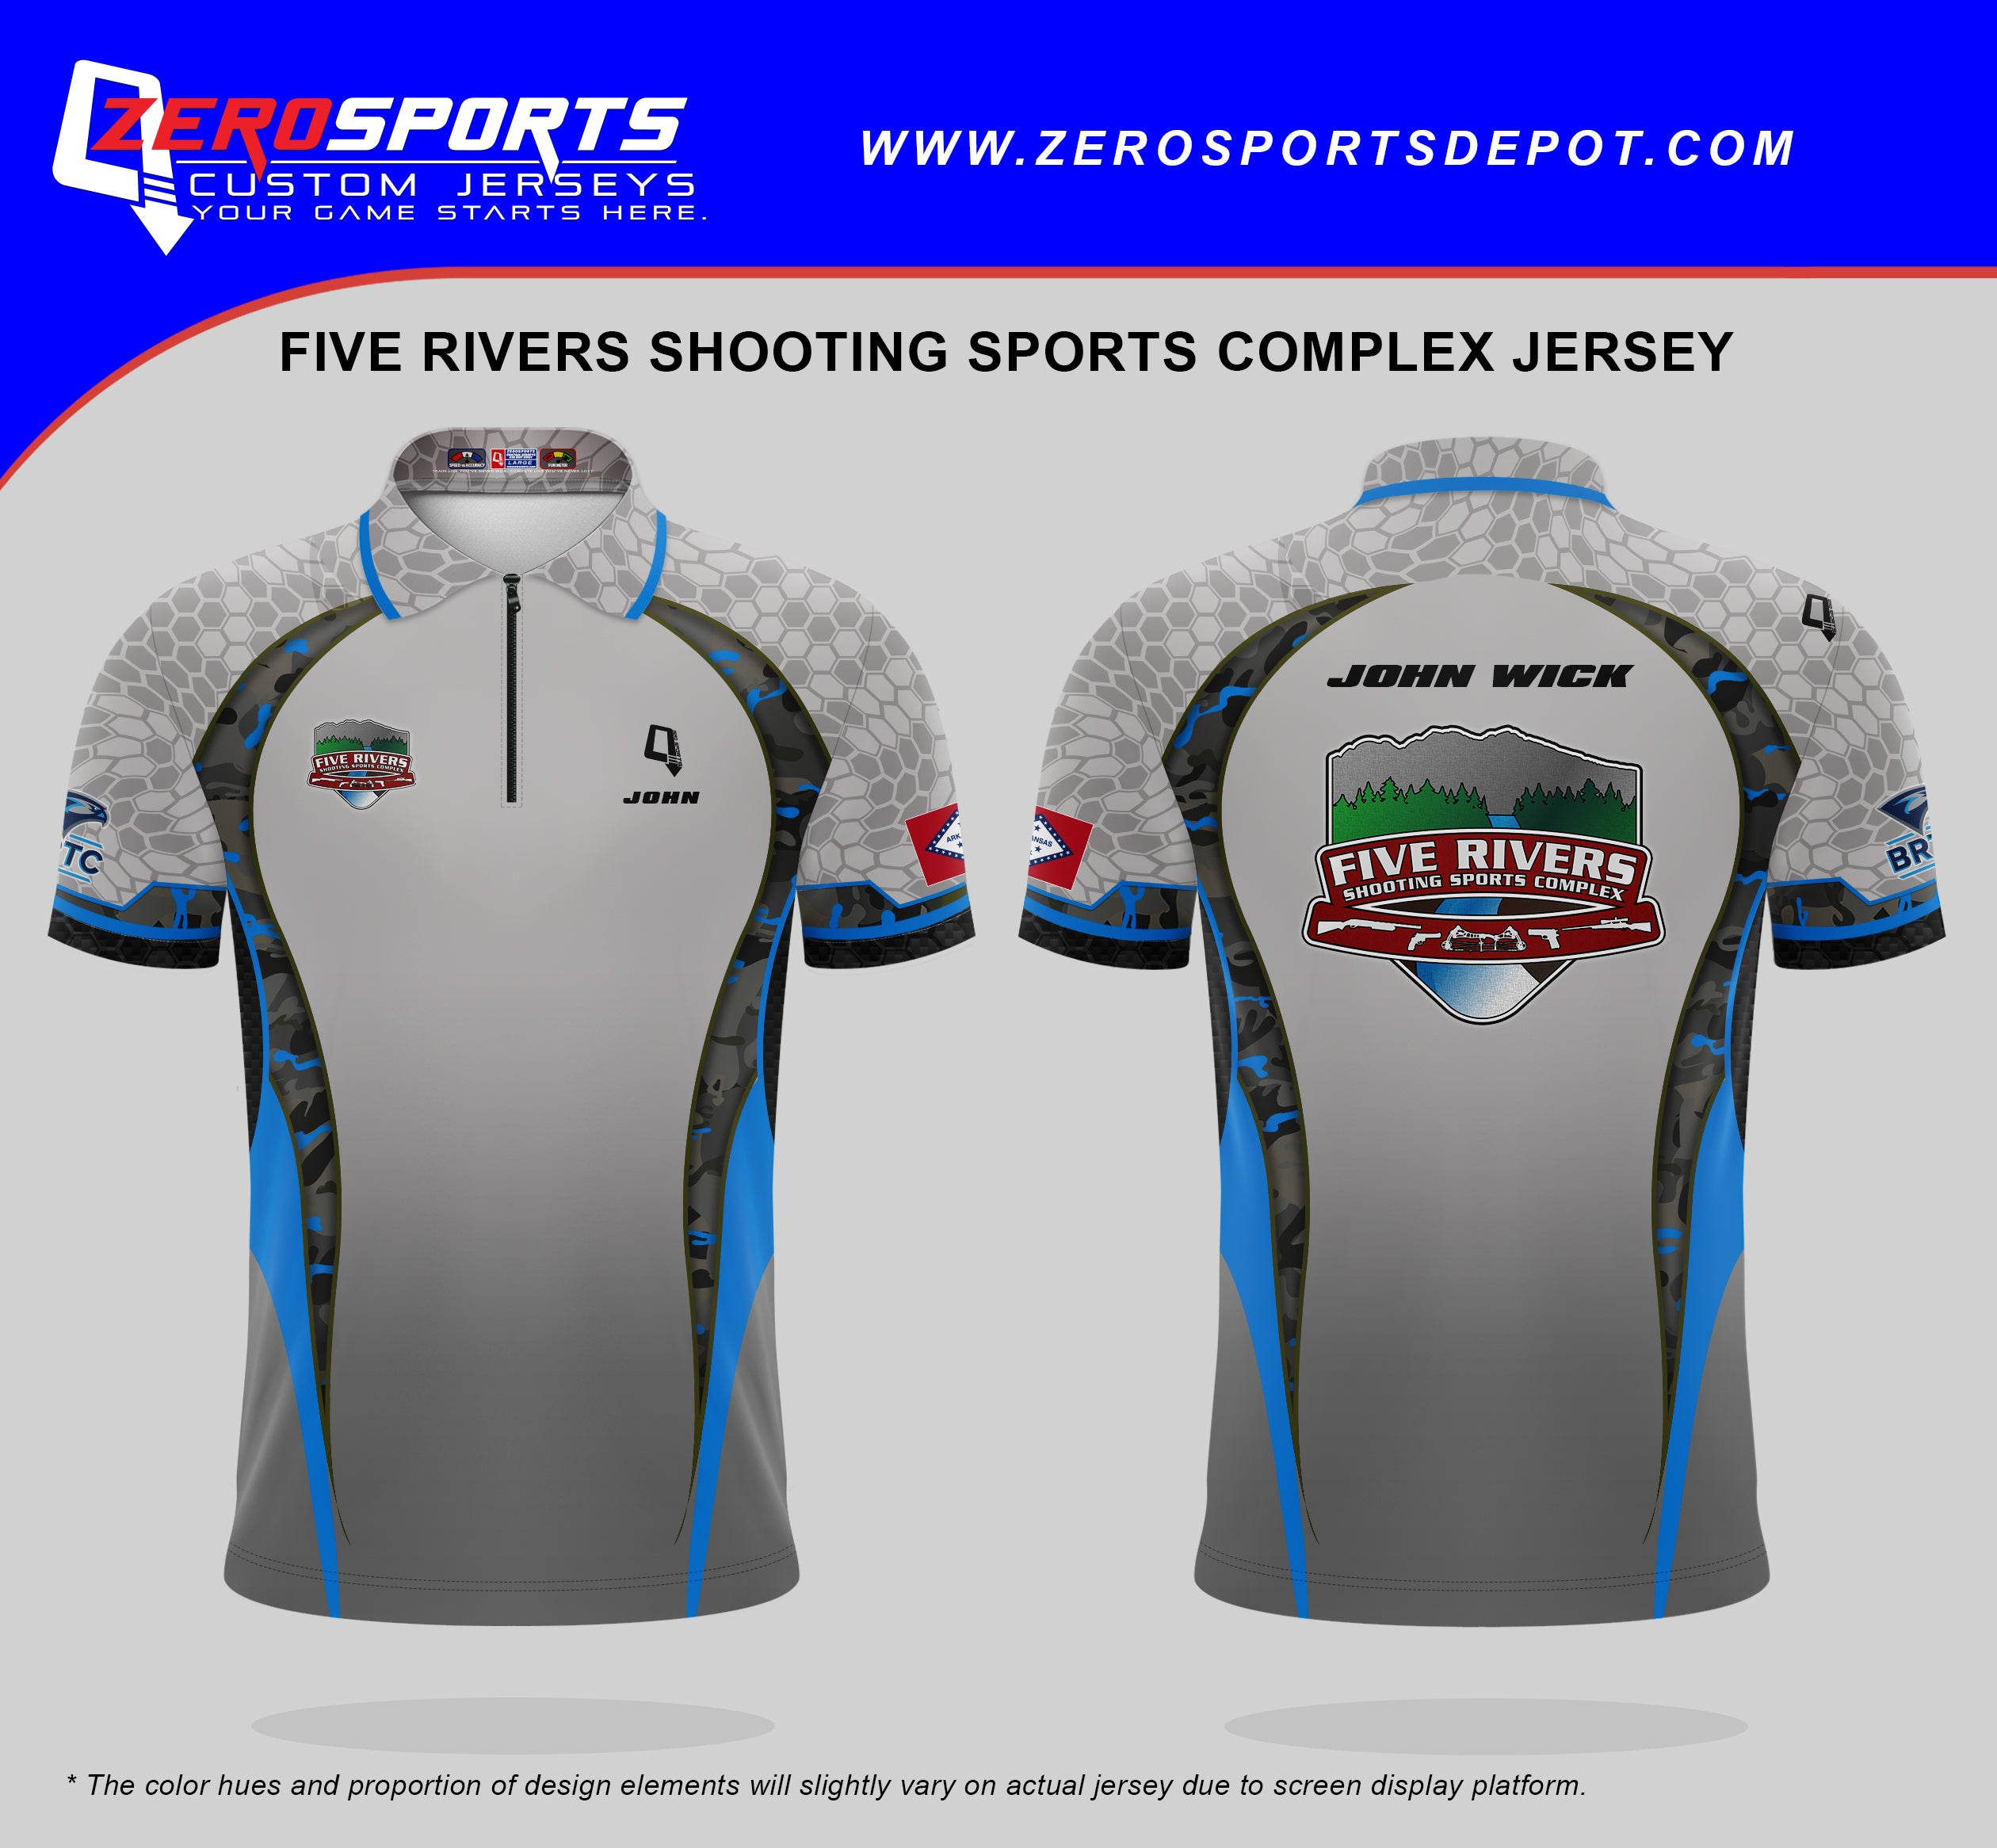 Five Rivers Shooting Sports Complex Club Jersey